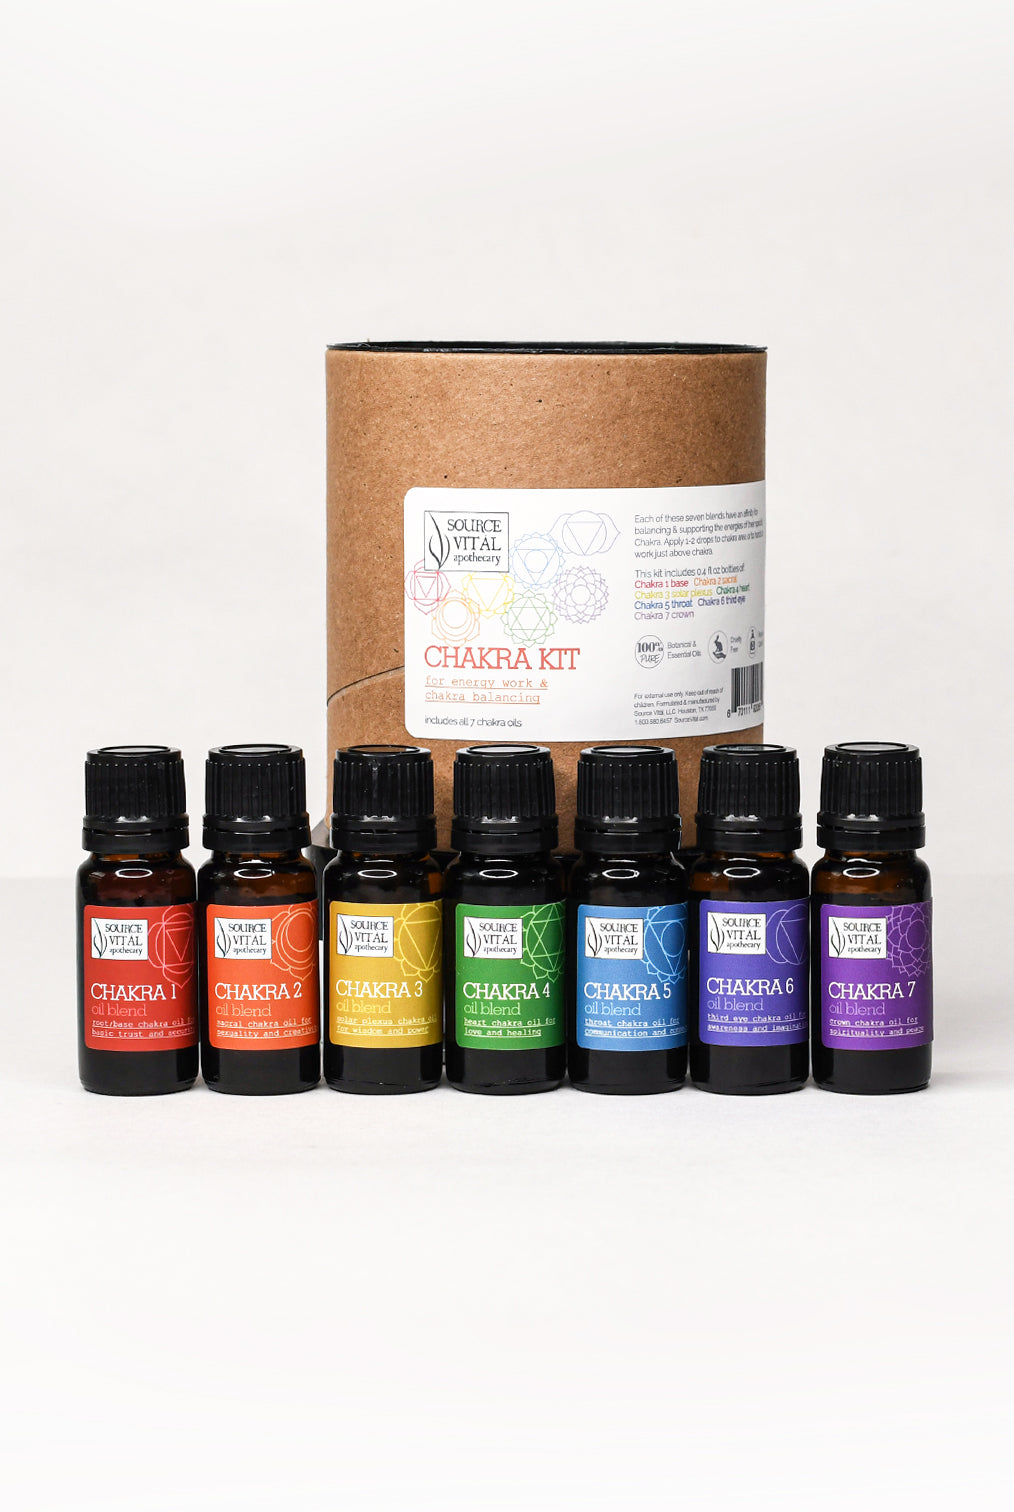 Home Essentials Kit - The Healing Place - The Healing Place